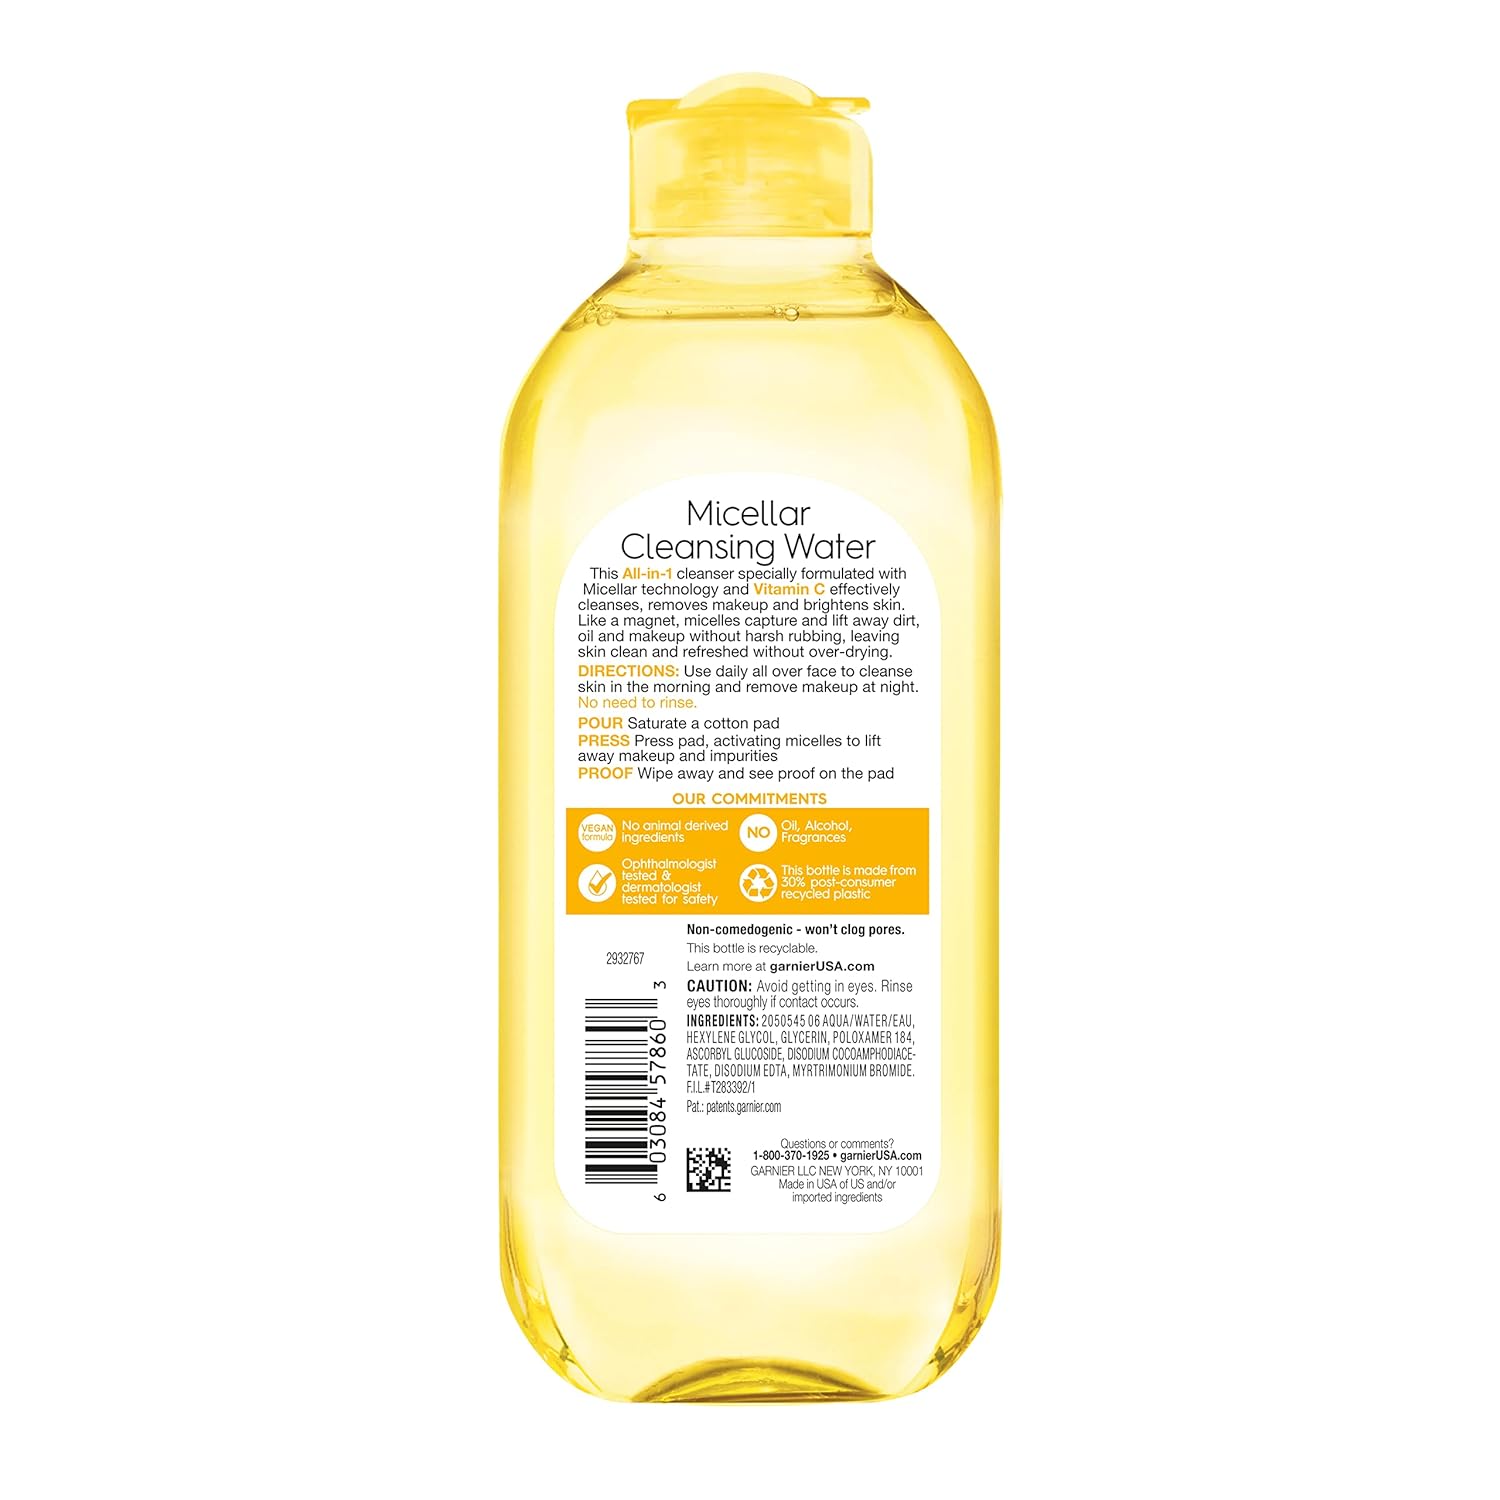 Garnier Micellar Water with Vitamin C, Facial Cleanser & Makeup Remover, 13.5 Fl Oz (400mL), 1 Count (Packaging May Vary)